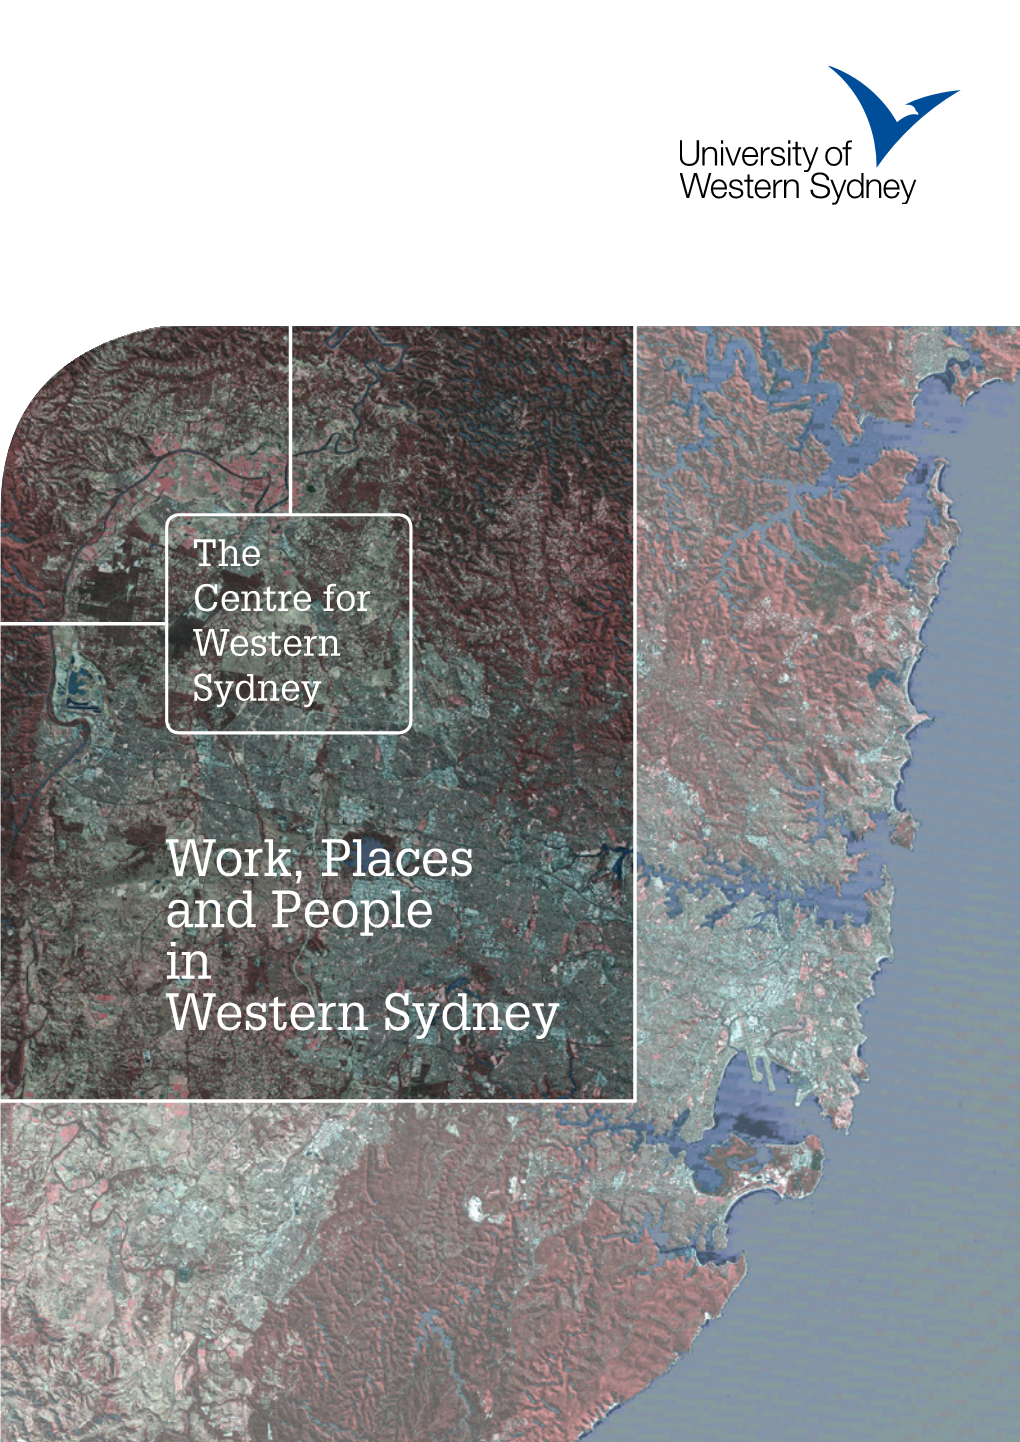 Work, Places and People in Western Sydney 2